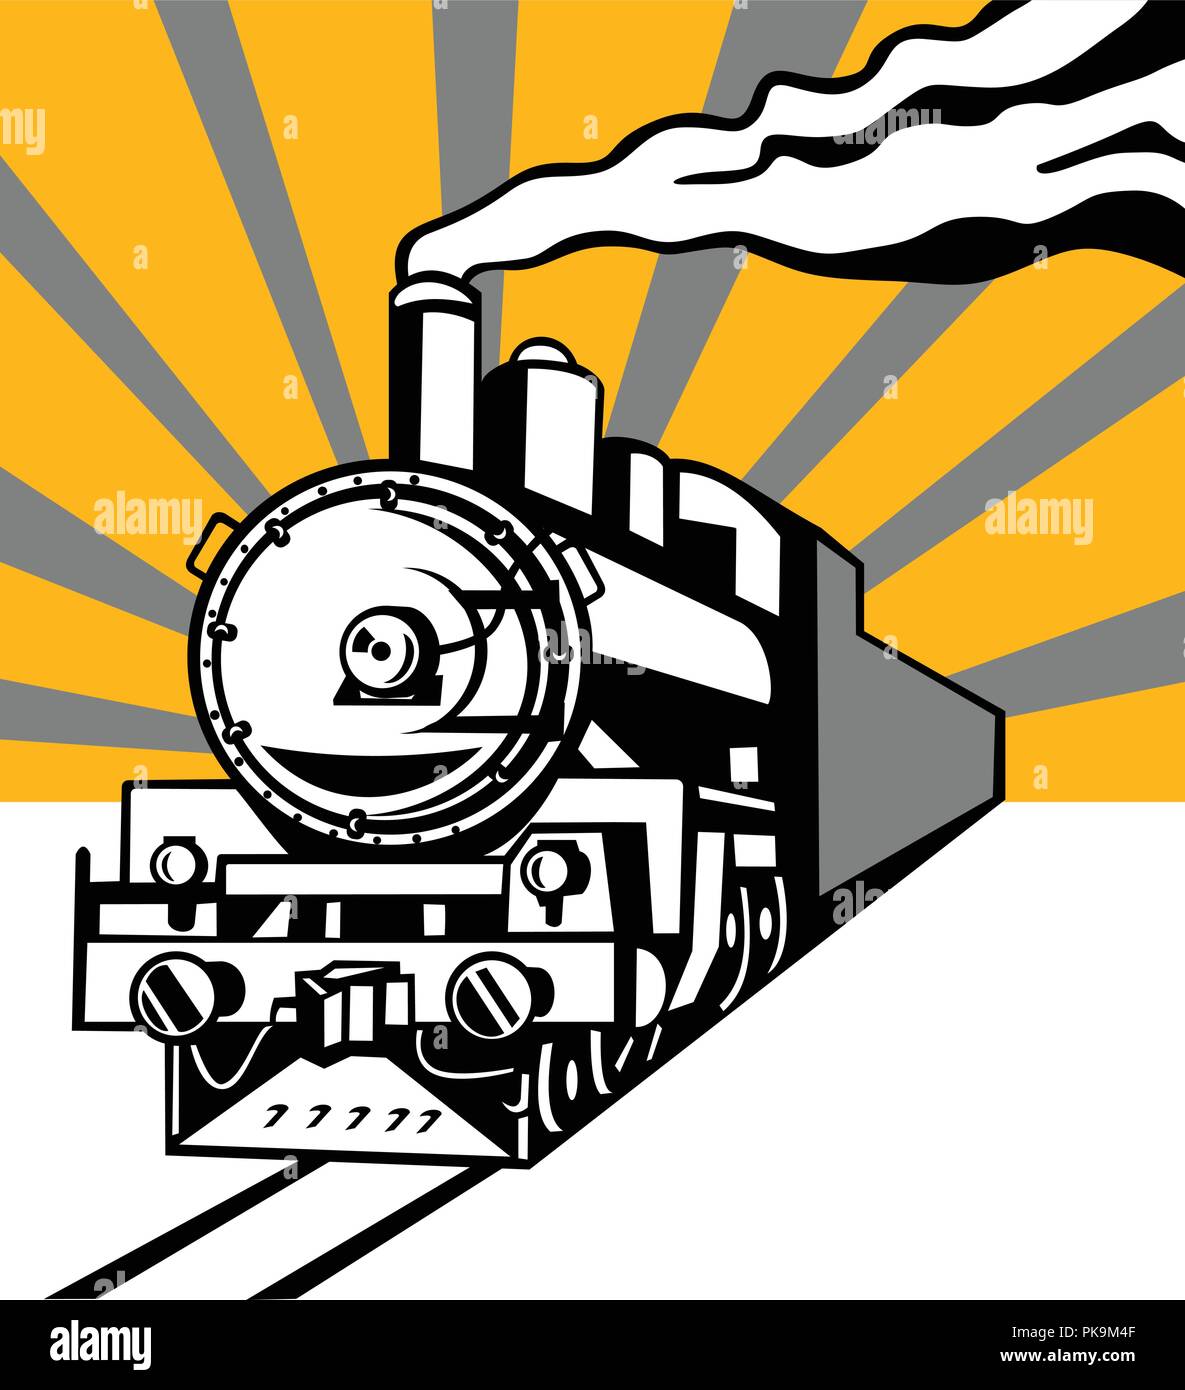 Retro style illustration of a vintage steam engine train or locomotive going towards the viewer with sunburst in background on isolated background. Stock Vector